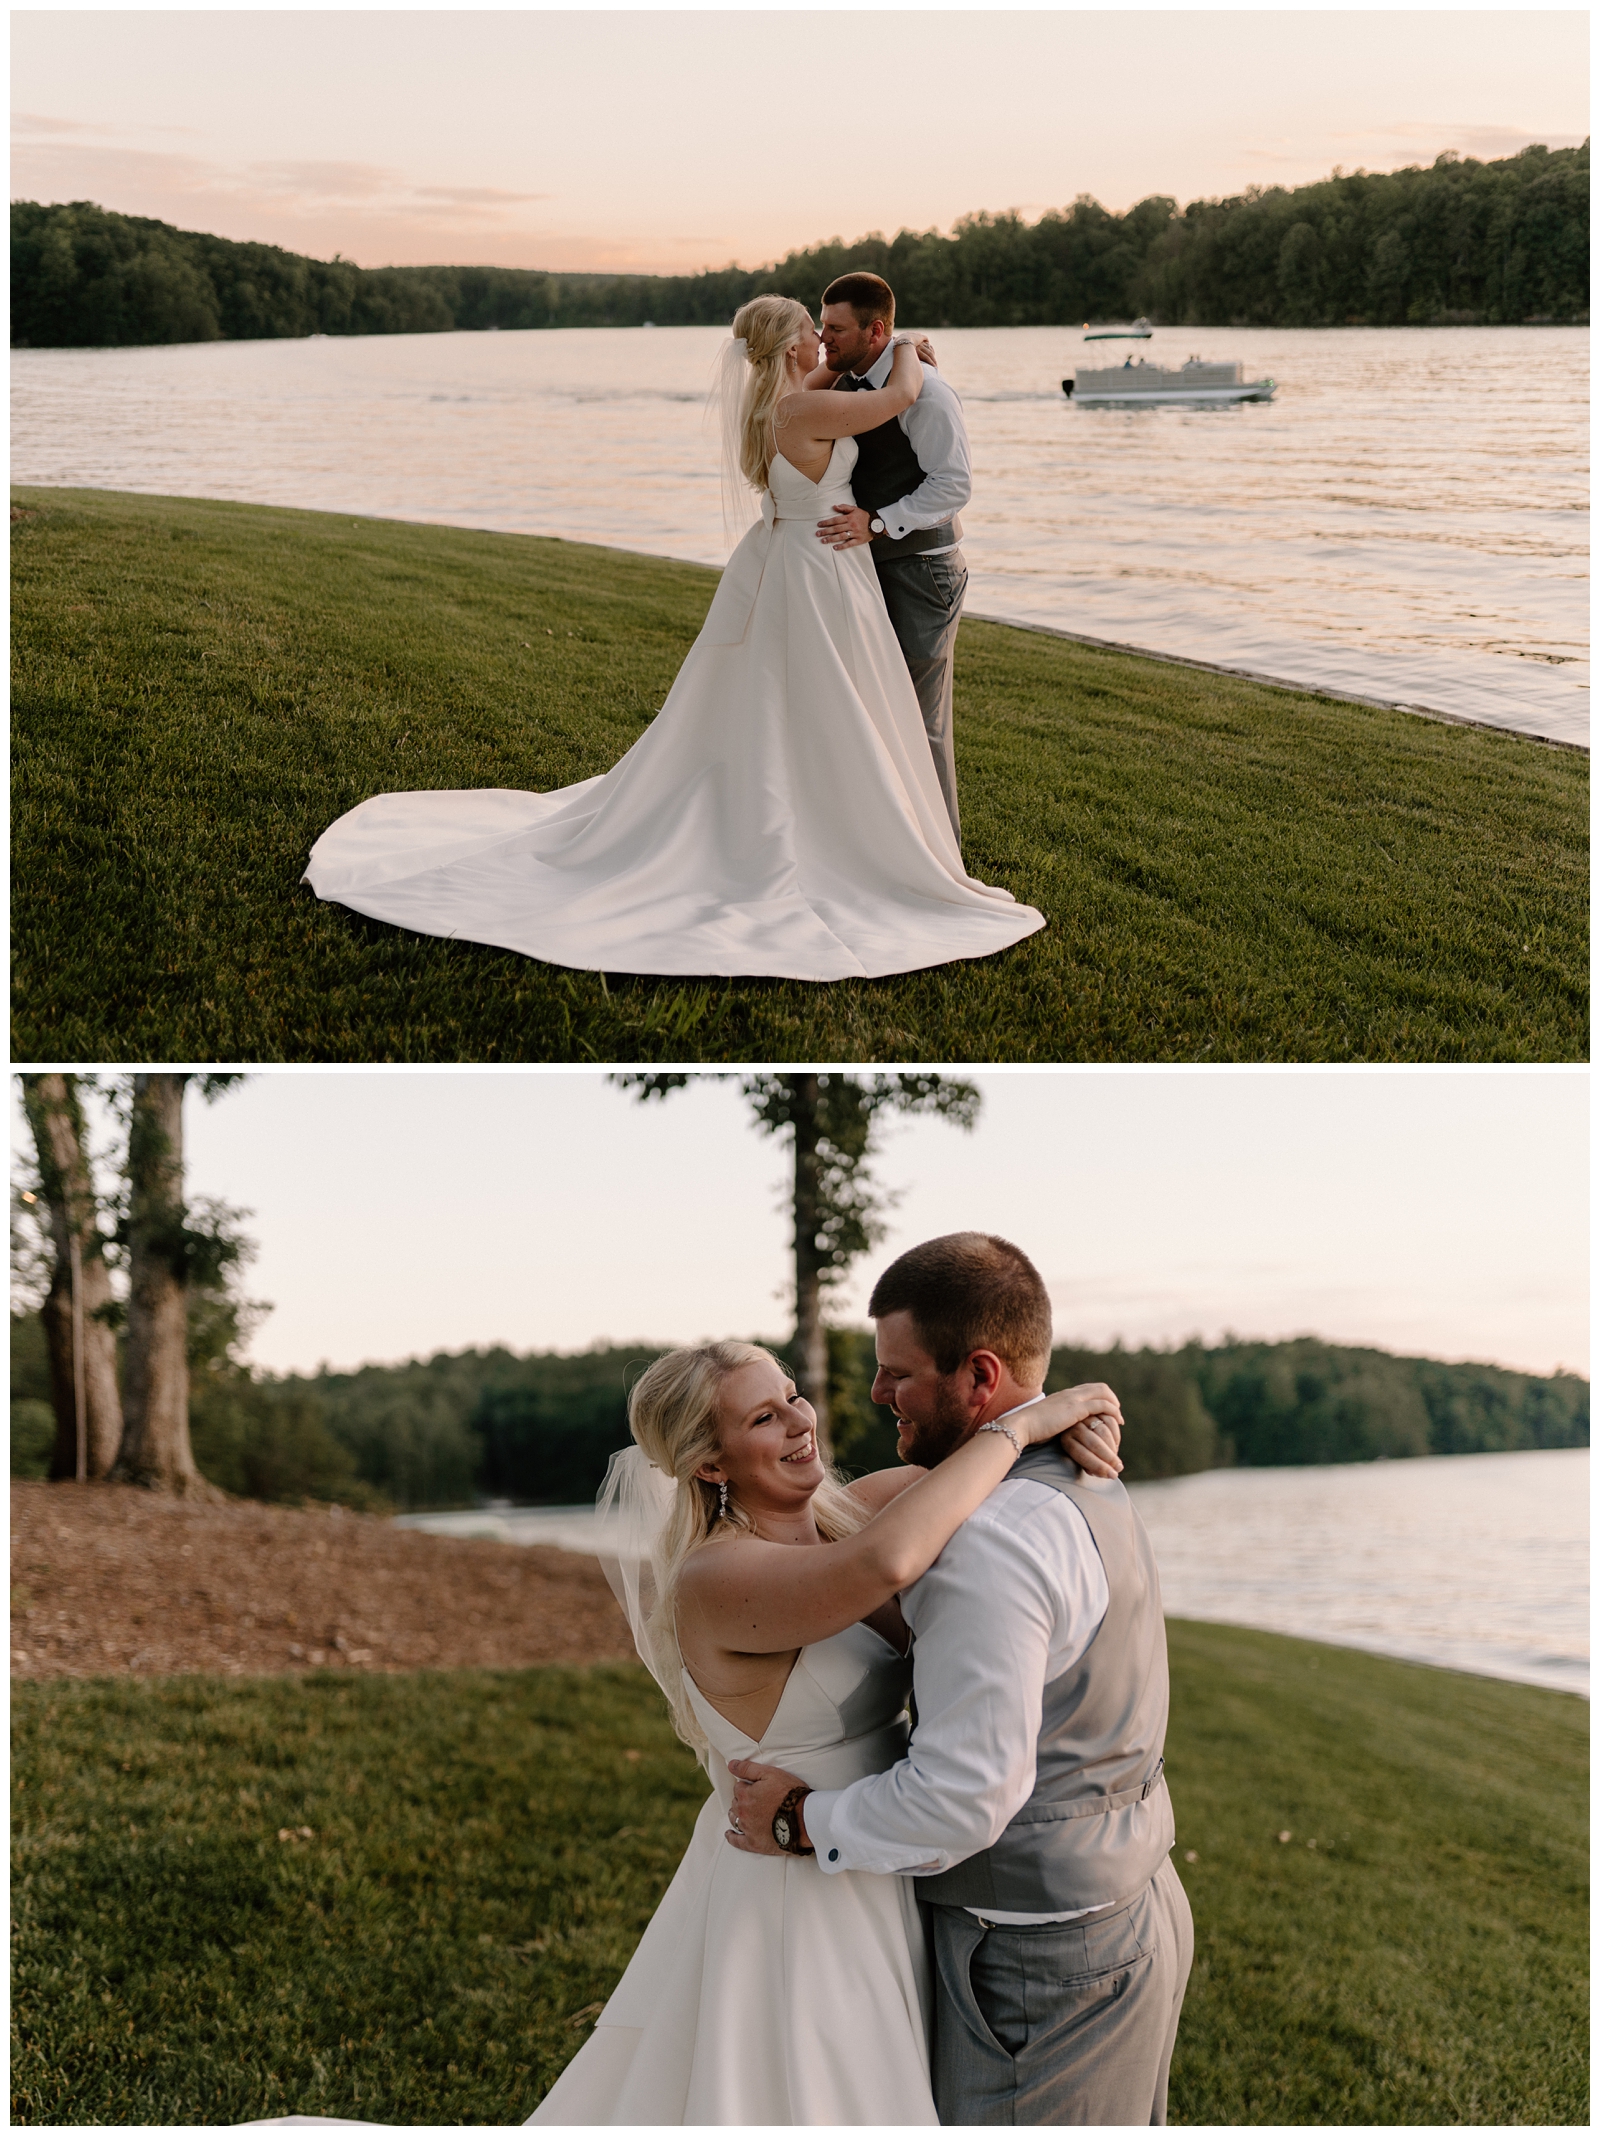 Sunset portraits in front of lake at their southern lakeside wedding in Stokesdale, NC by North Carolina photographer